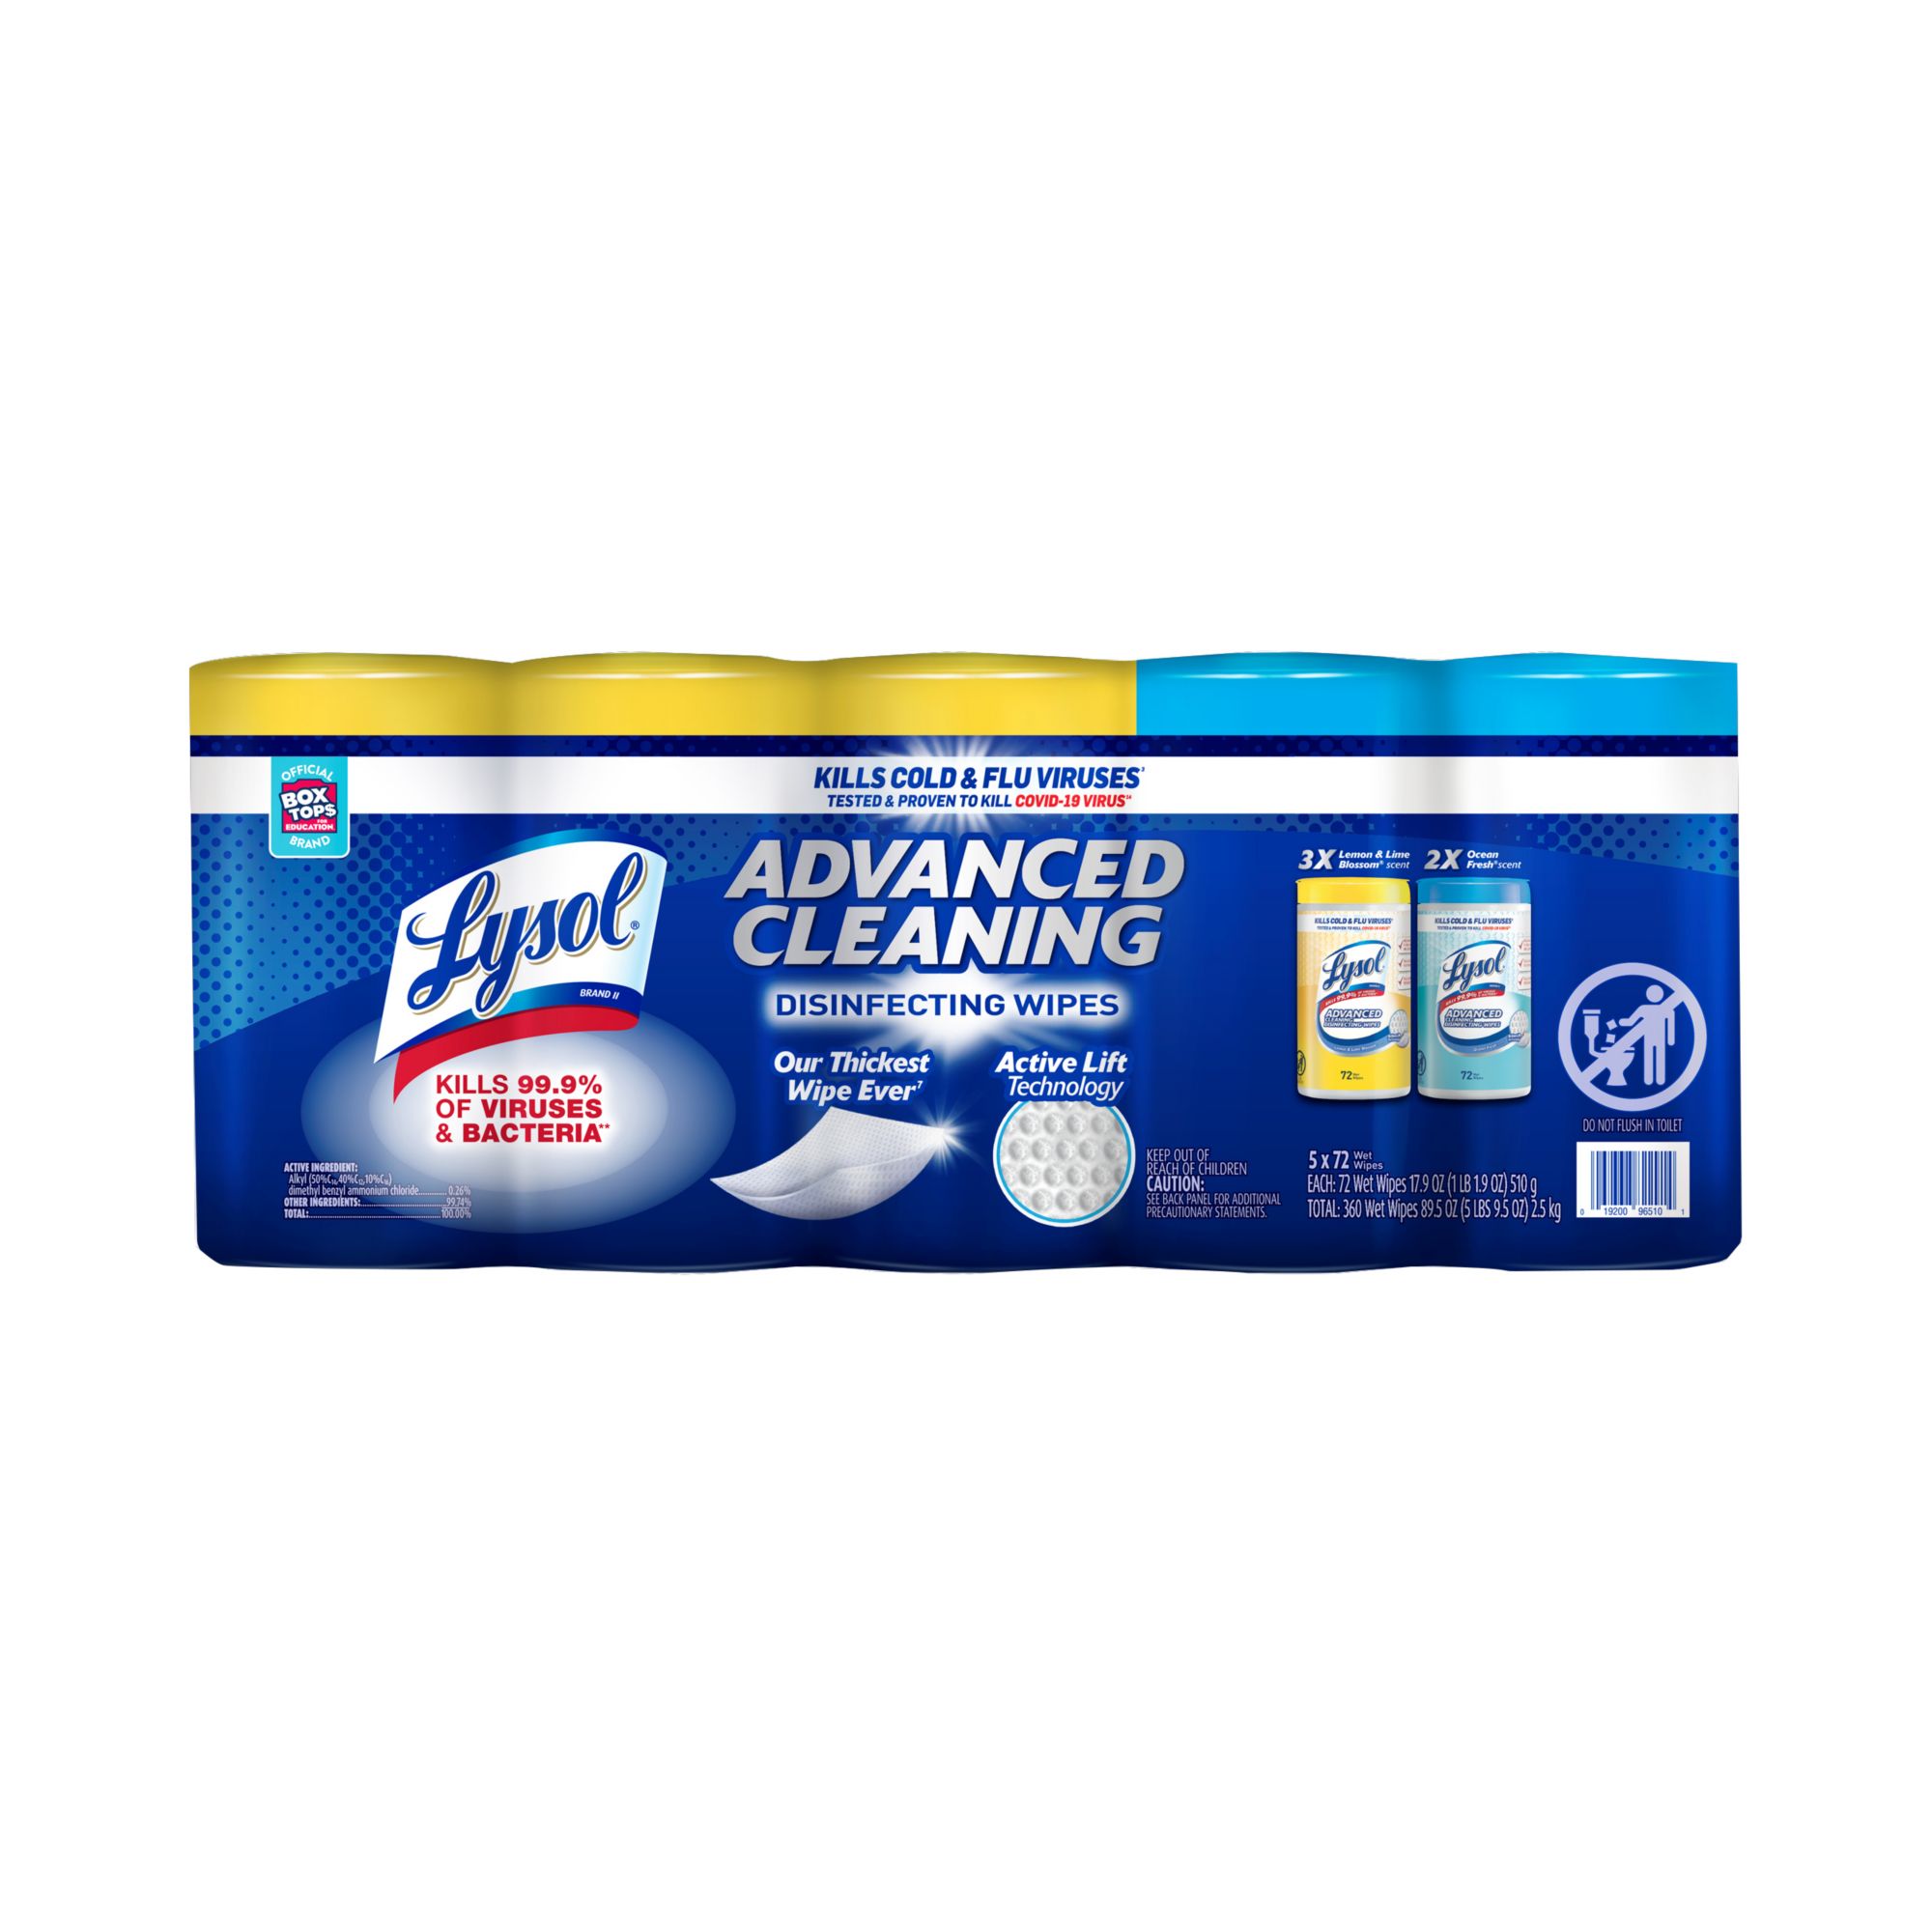 Clorox Disinfecting Wipes, Variety Pack, 85-count, 5-pack